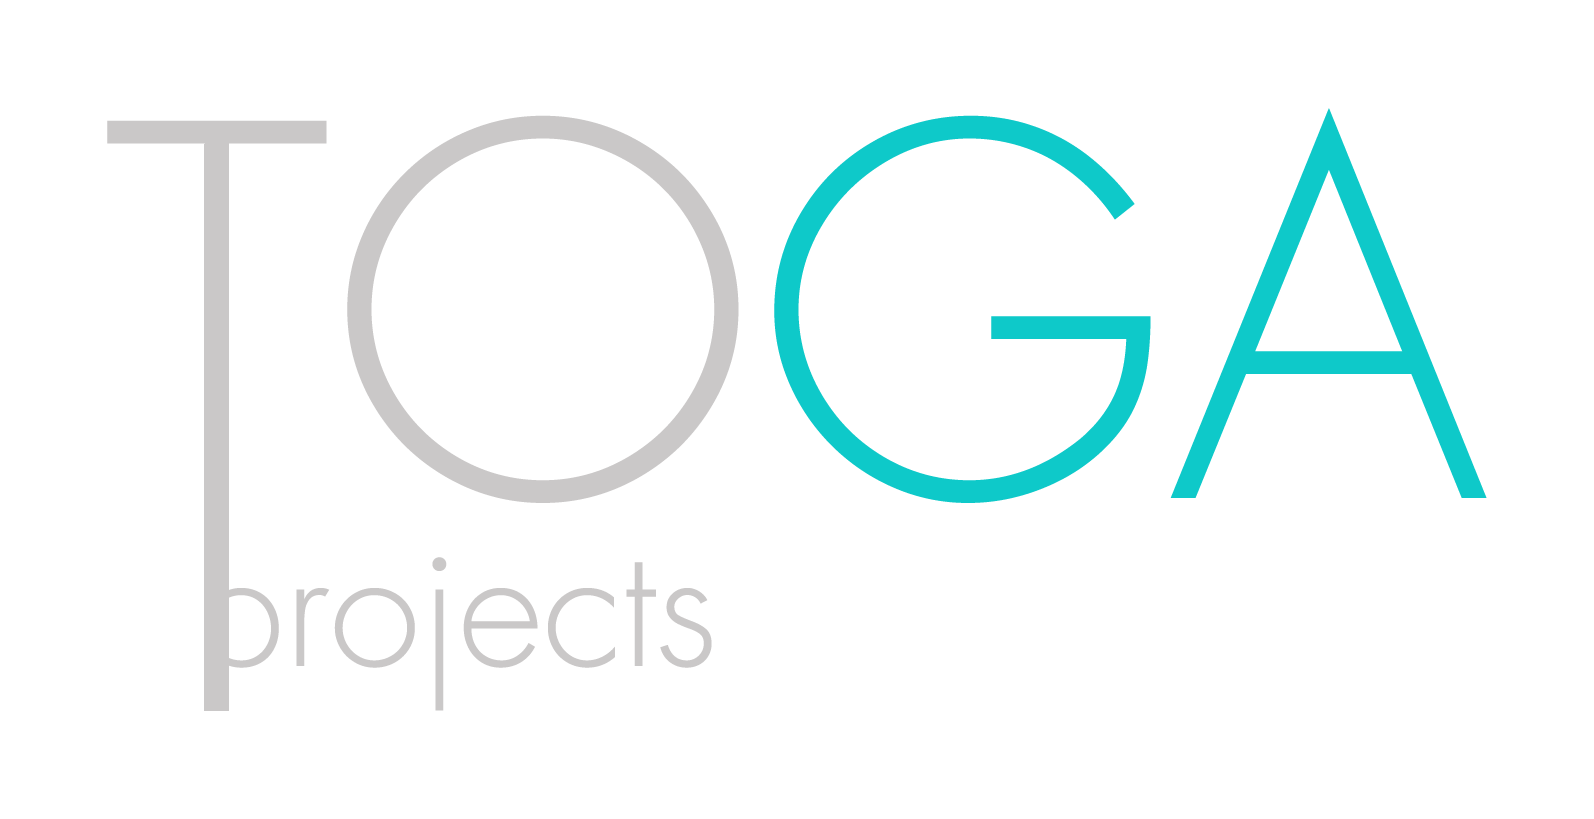 TOGA Projects logo not found